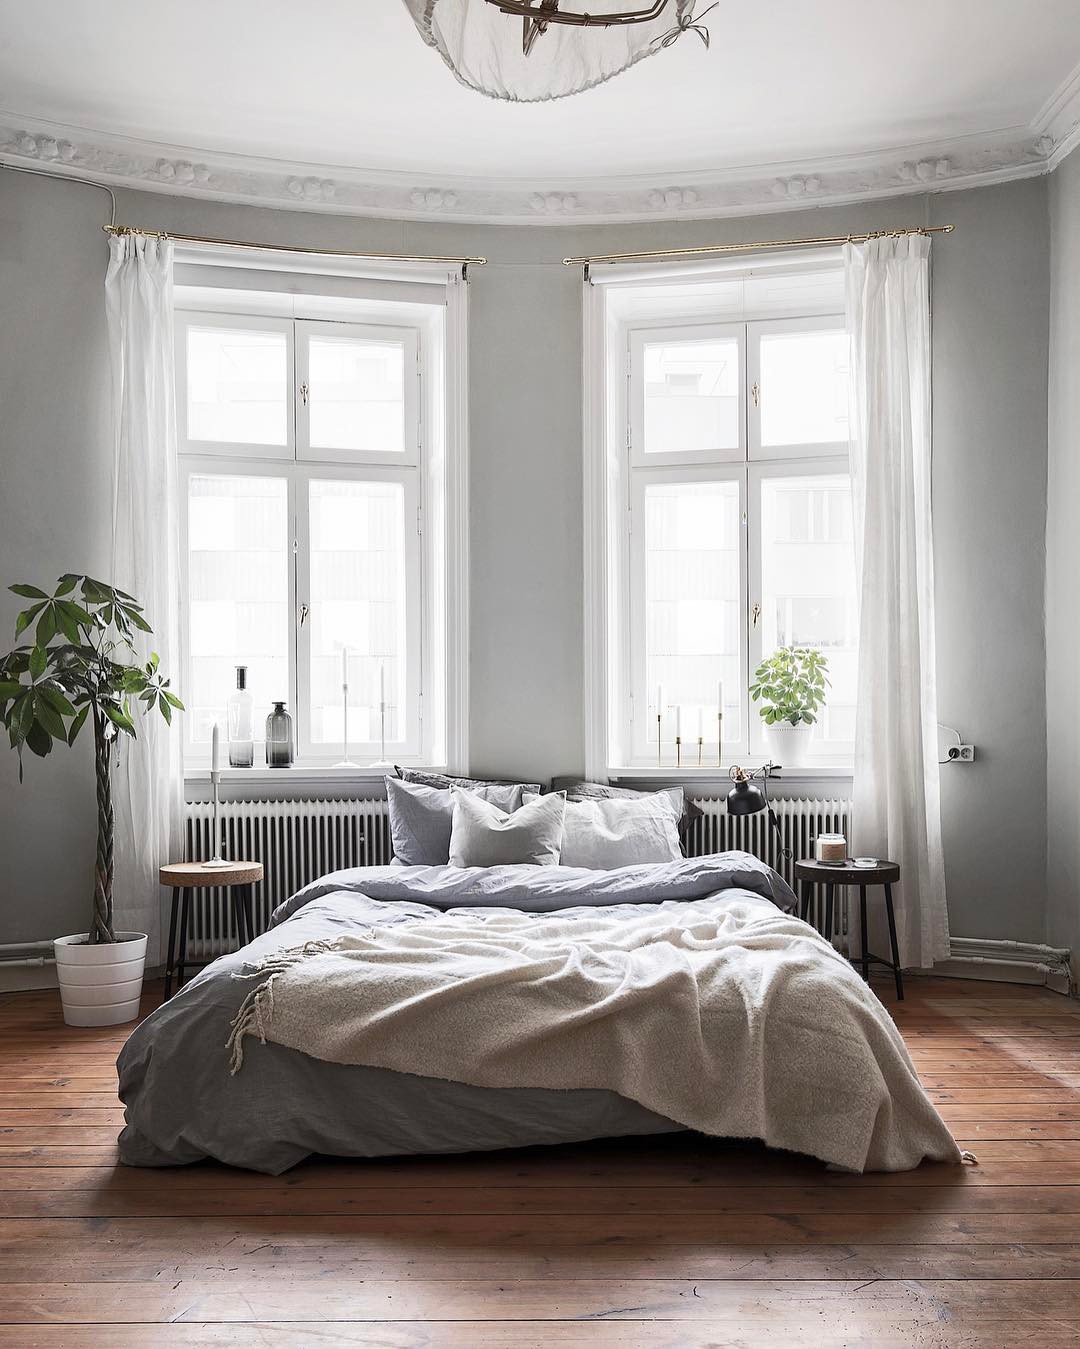 Gray bedroom with platform bed and wood floors. Photo by Instagram user @kronfoto